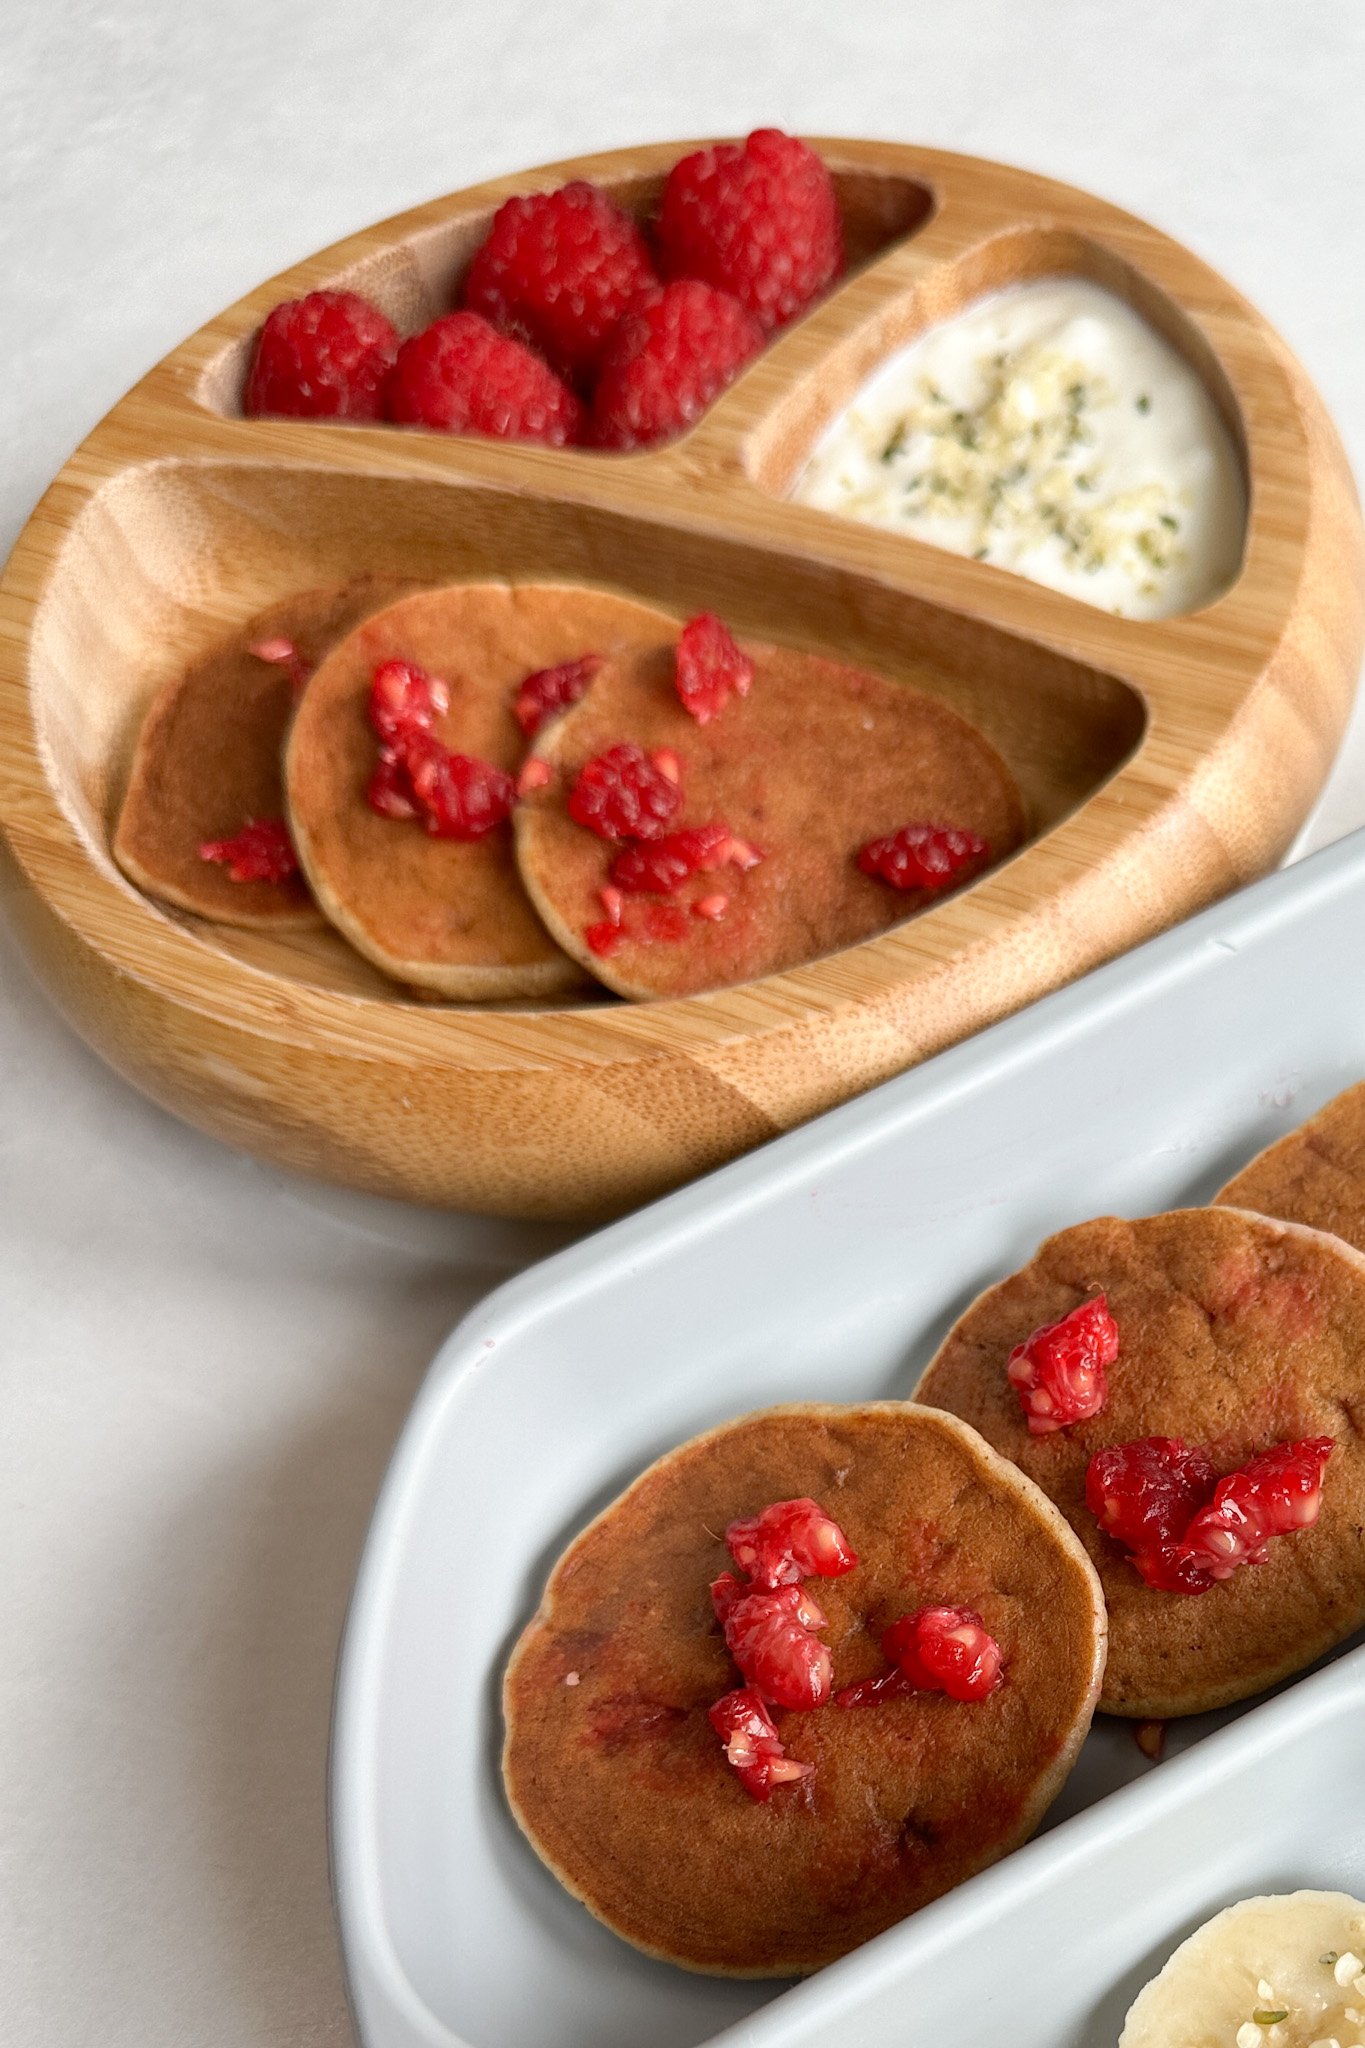 Peanut butter banana pancakes served with raspberries and bananas.